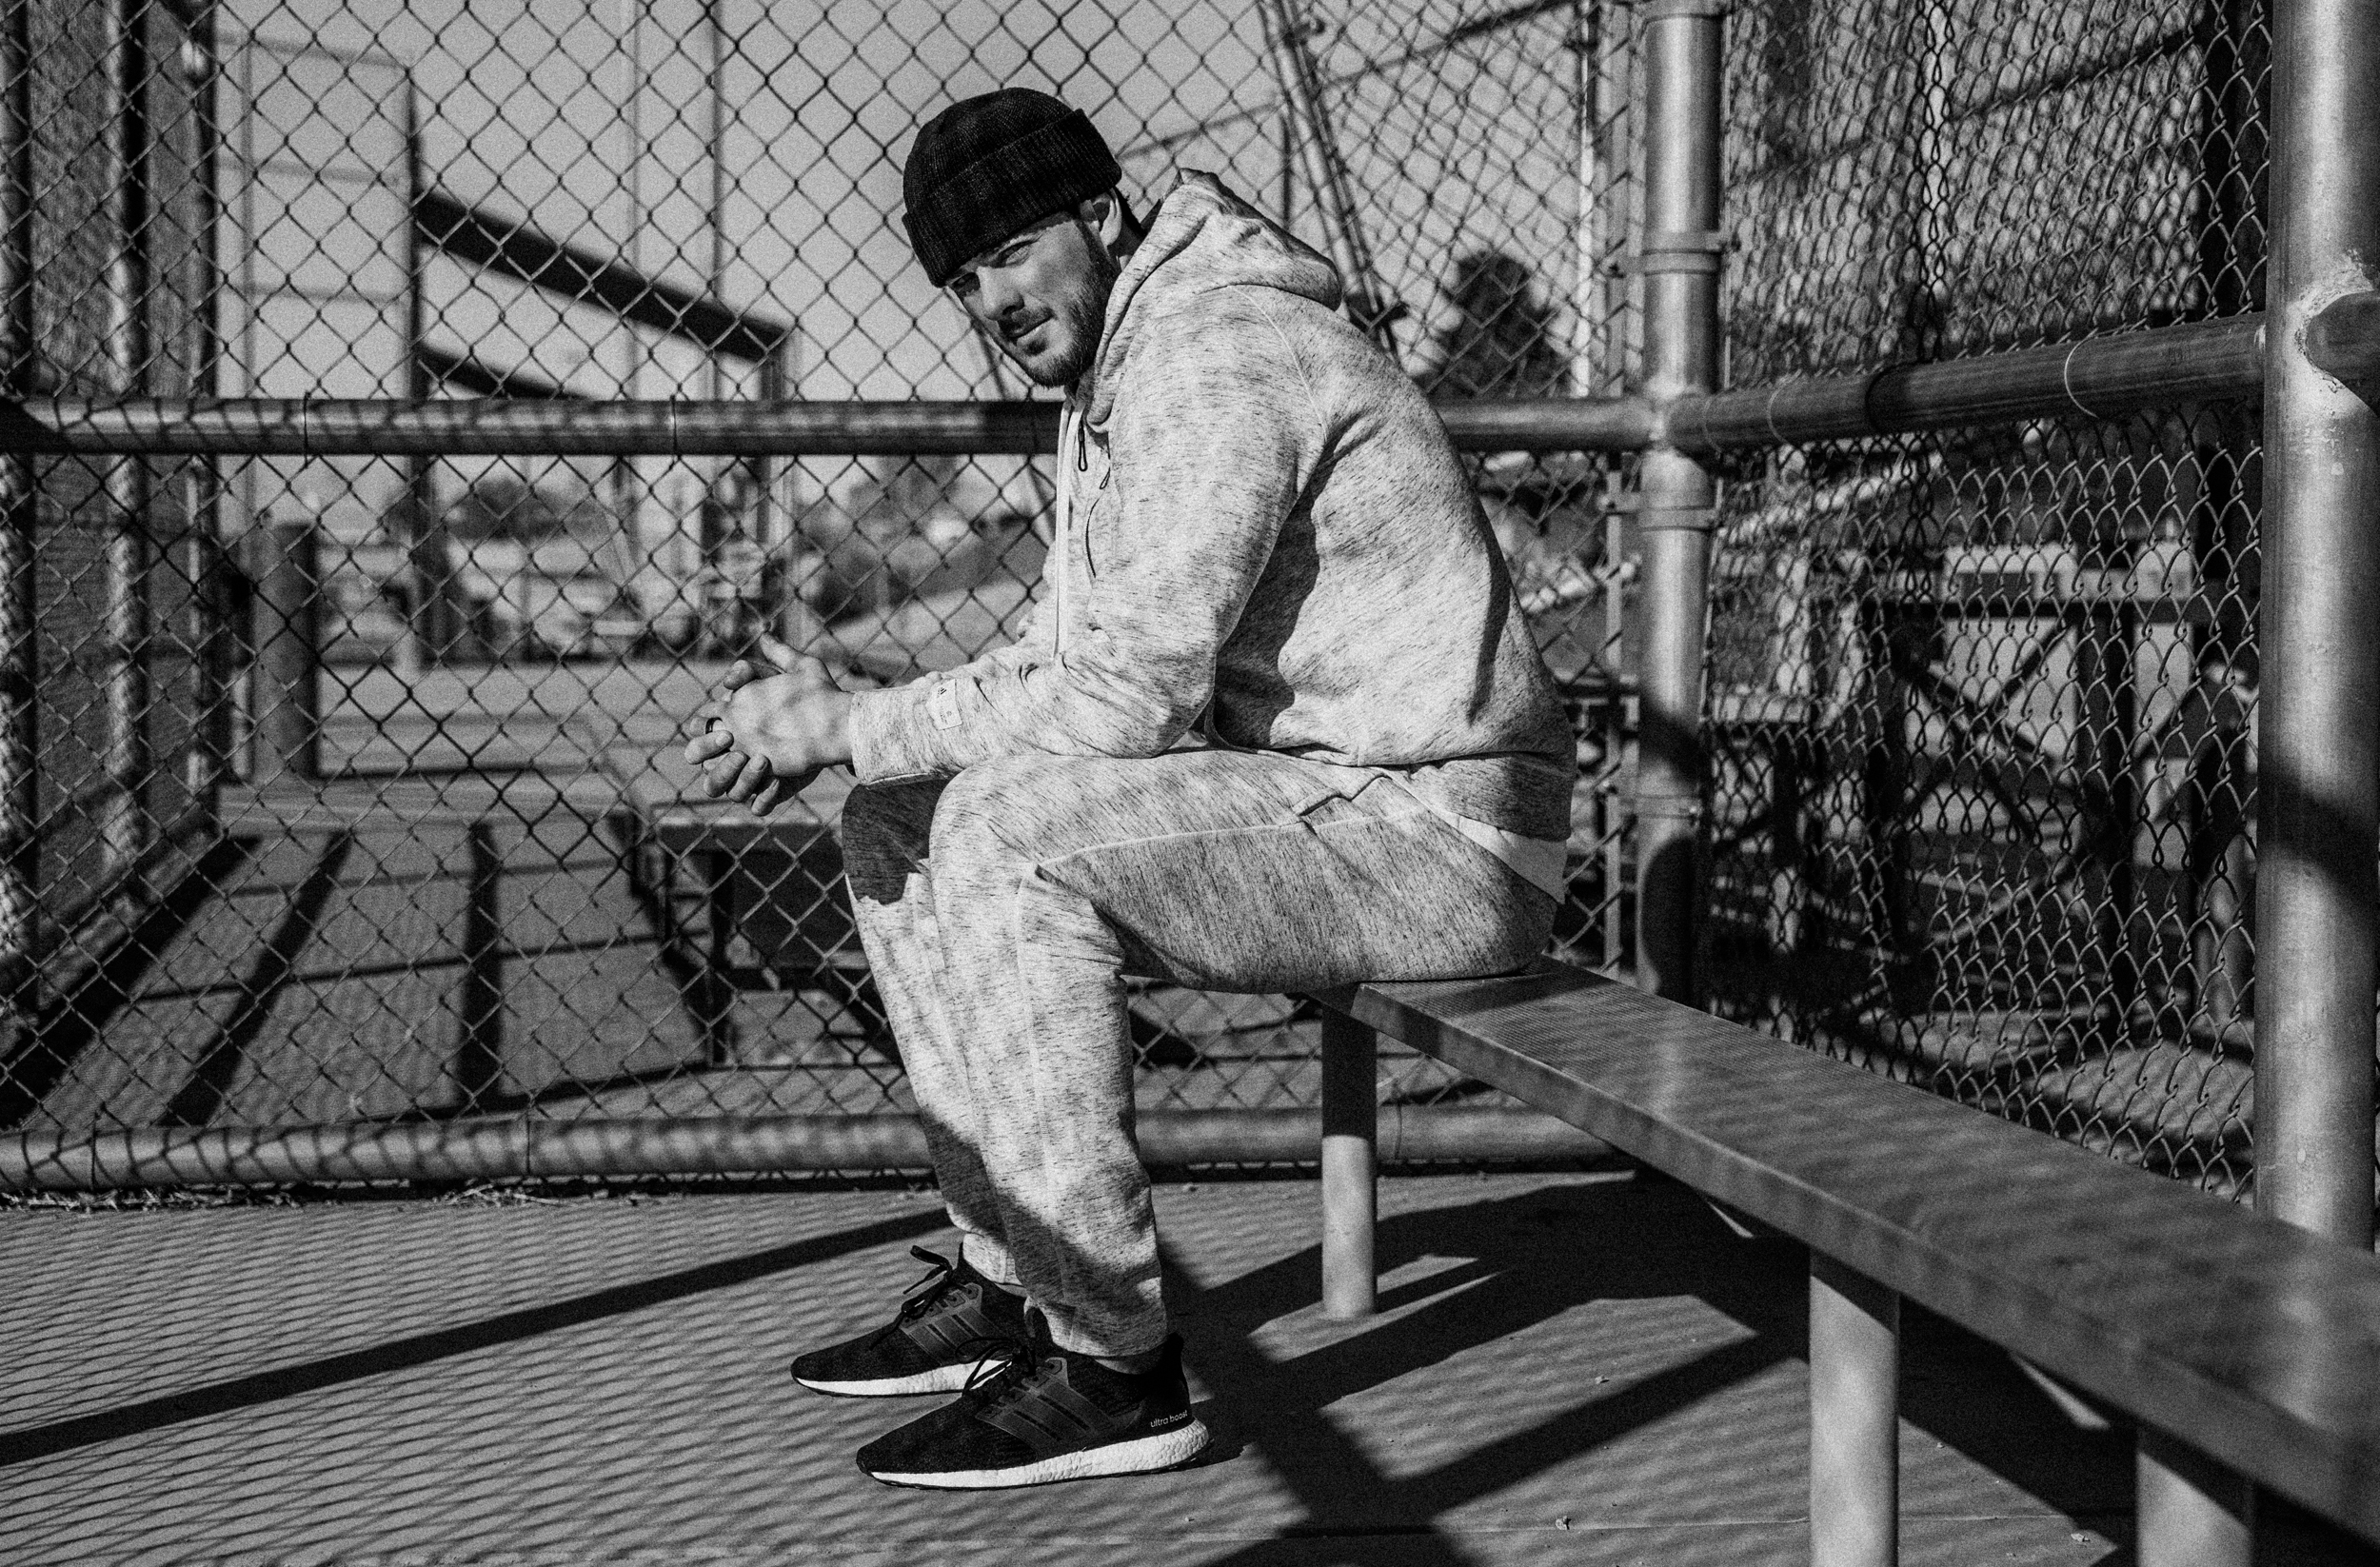 Adidas x Reigning Champ Unveil First Primeknit Apparel Collection